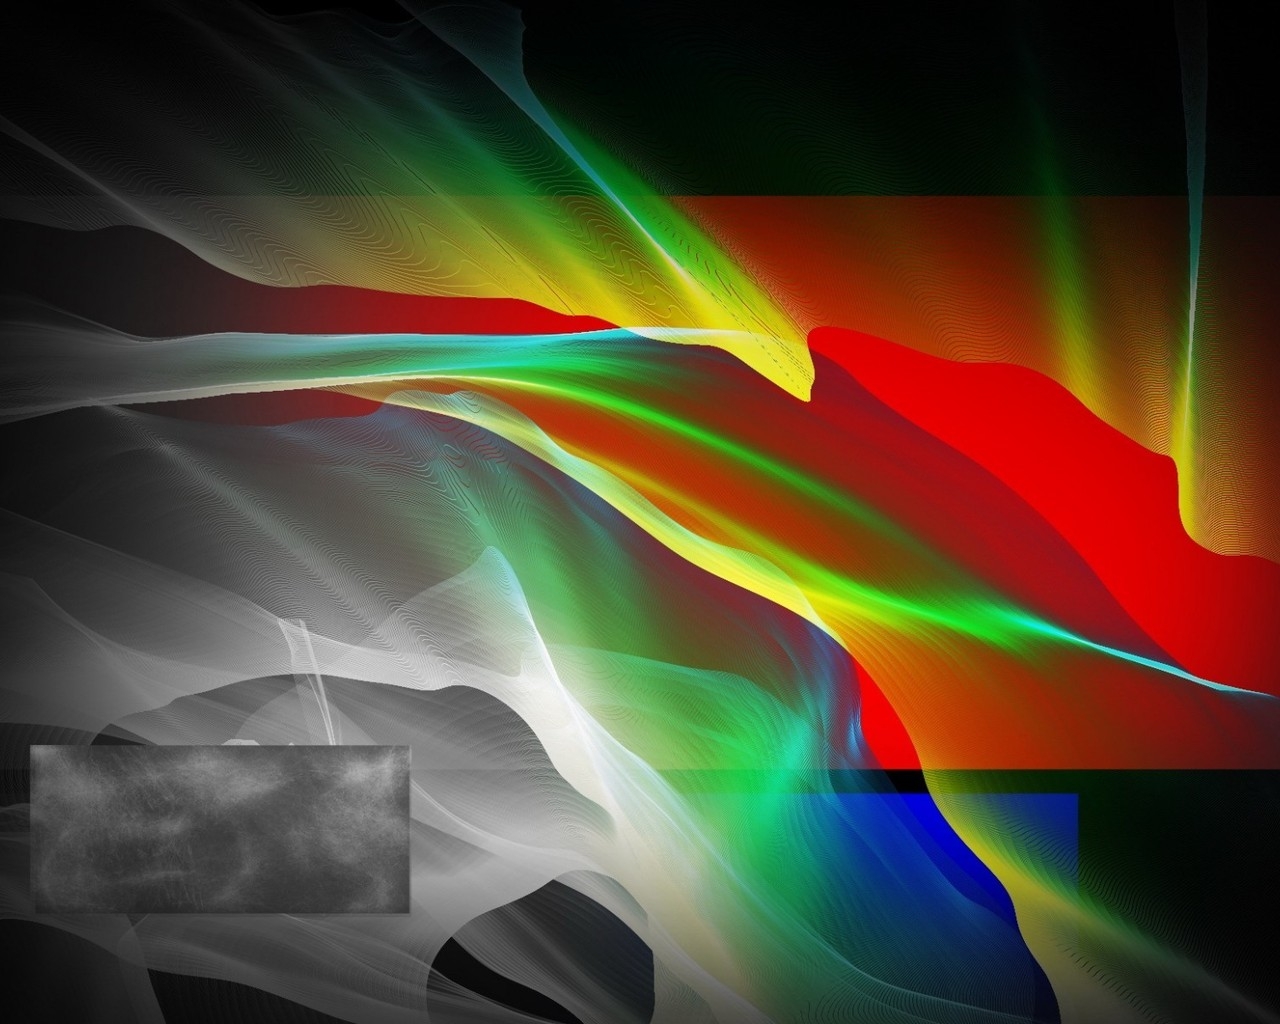 Abstract Shapes for 1280 x 1024 resolution